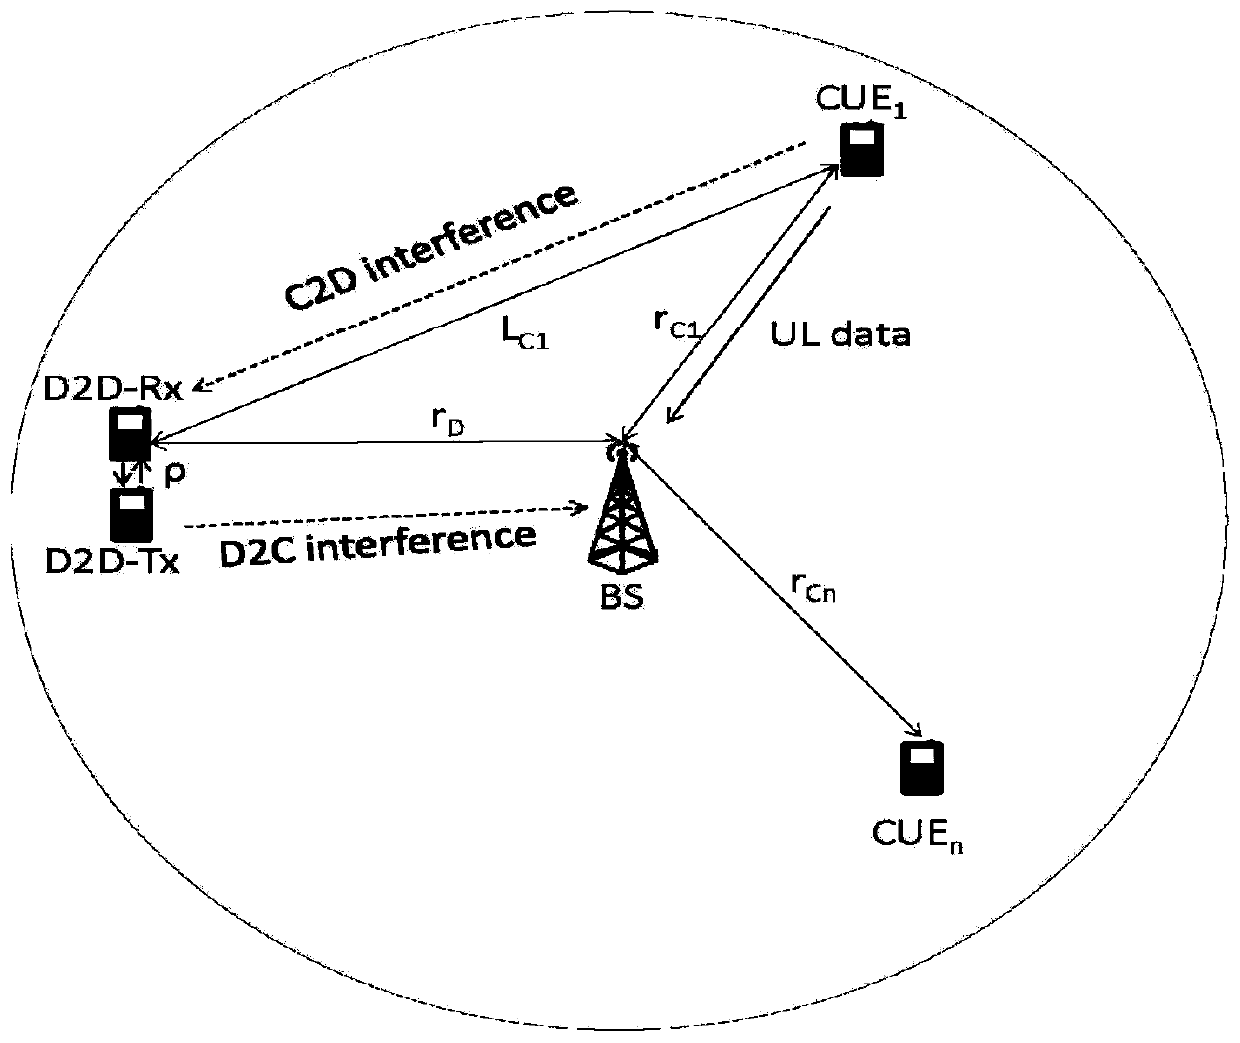 A d2d communication interference coordination method based on user location information